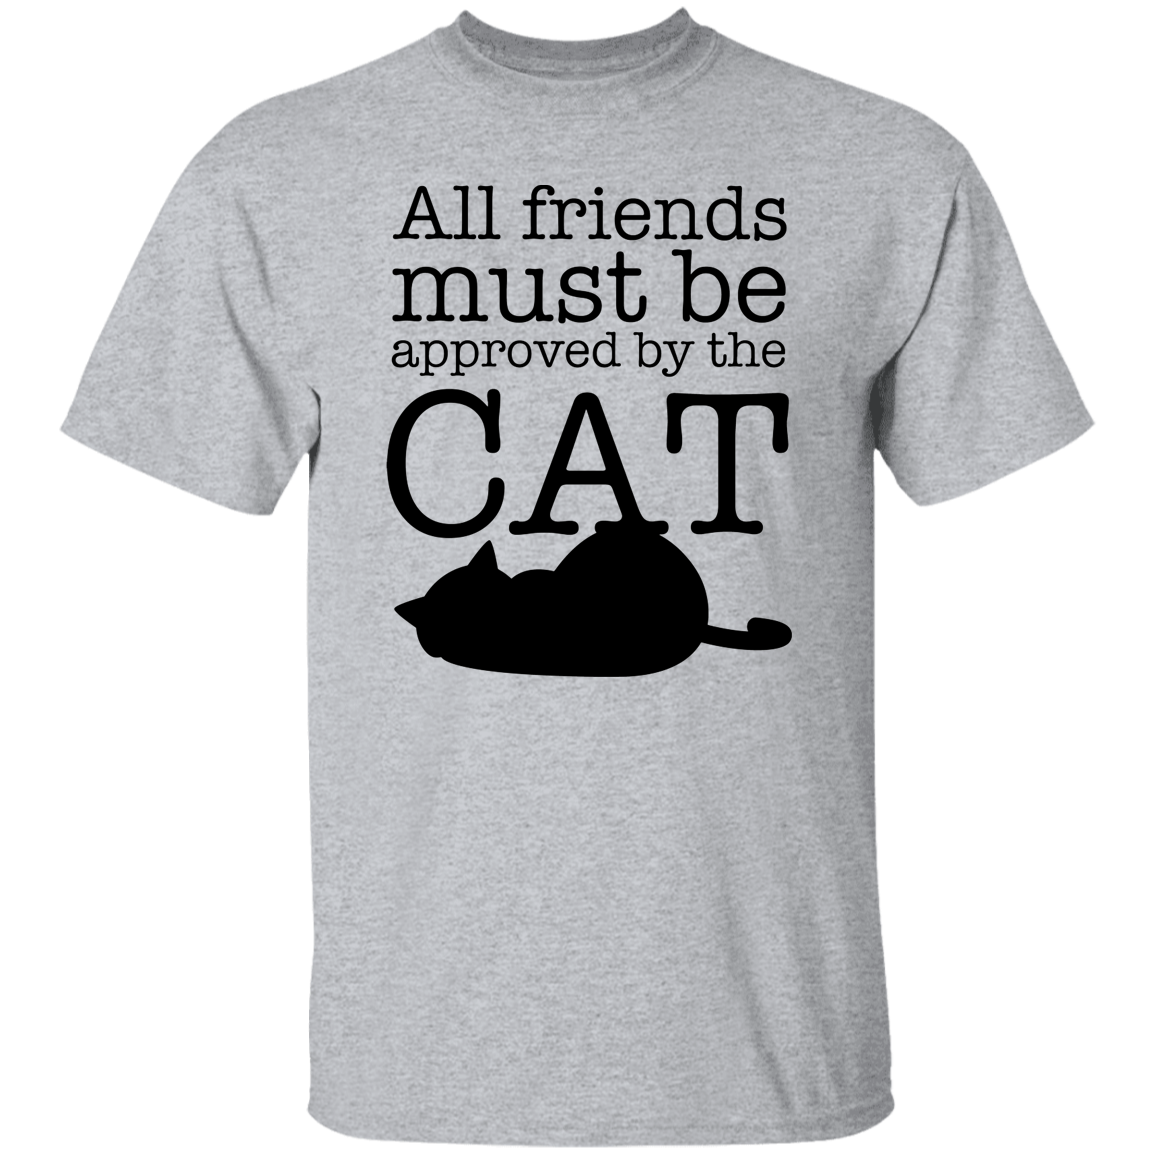 All friends Must Be Approved by the Cat 5.3 oz. T-Shirt